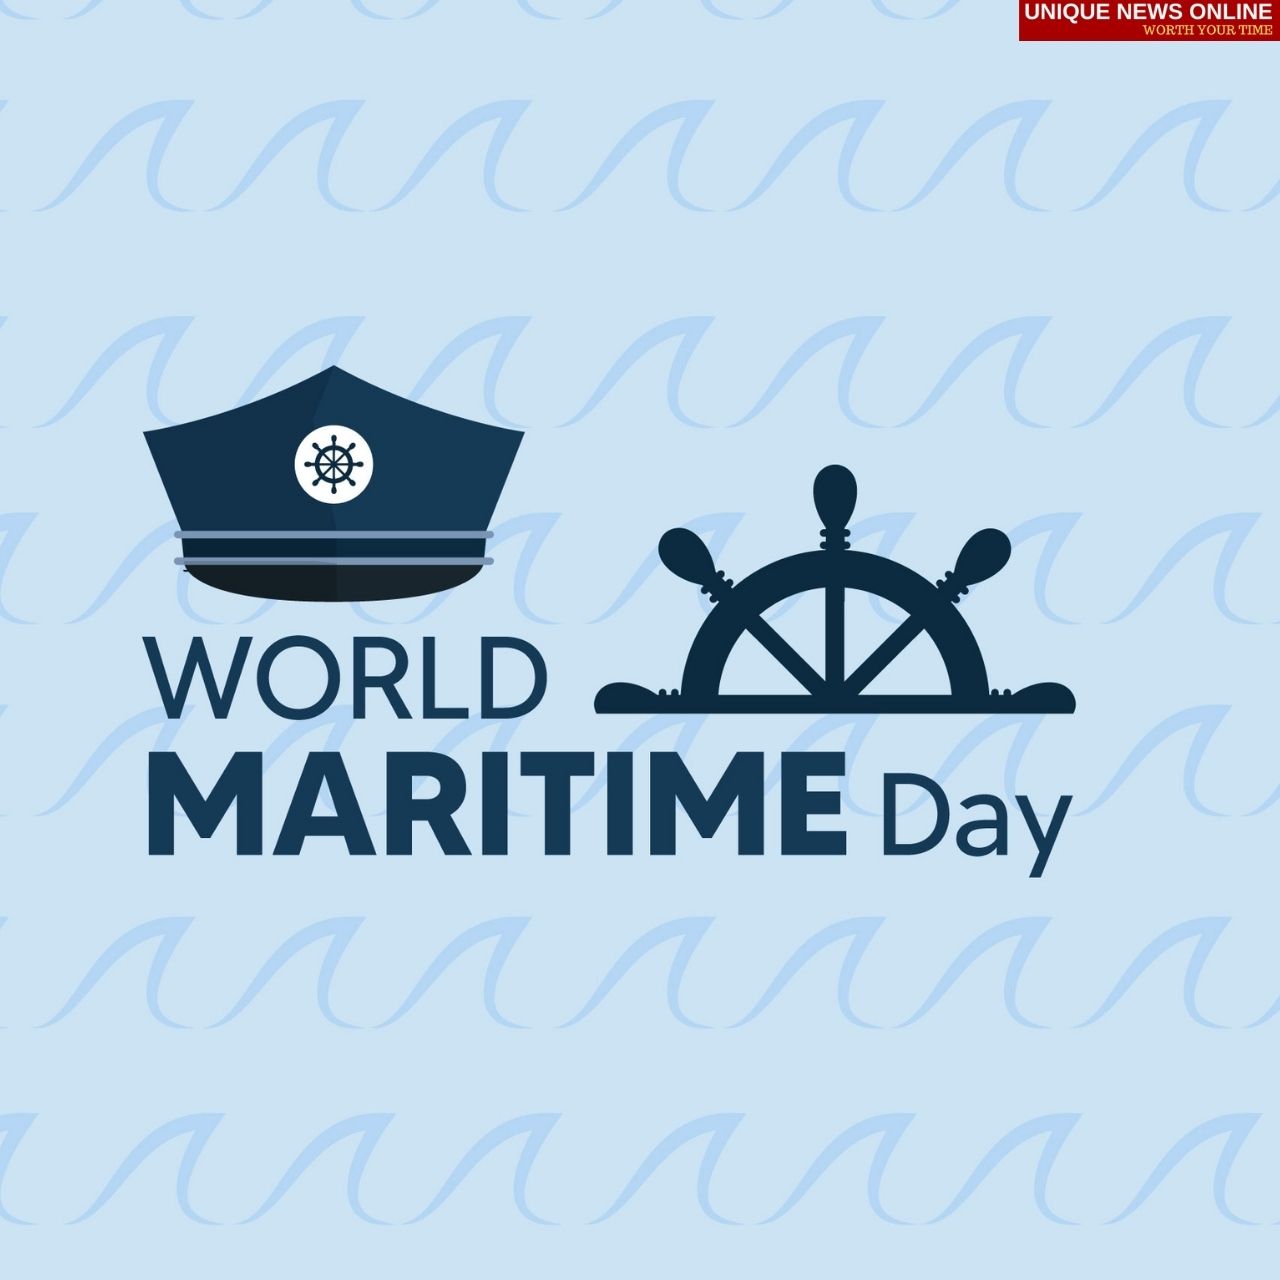 World Maritime Day 2021 Quotes, Wishes, Greetings, Messages, HD Images, and Stickers to share